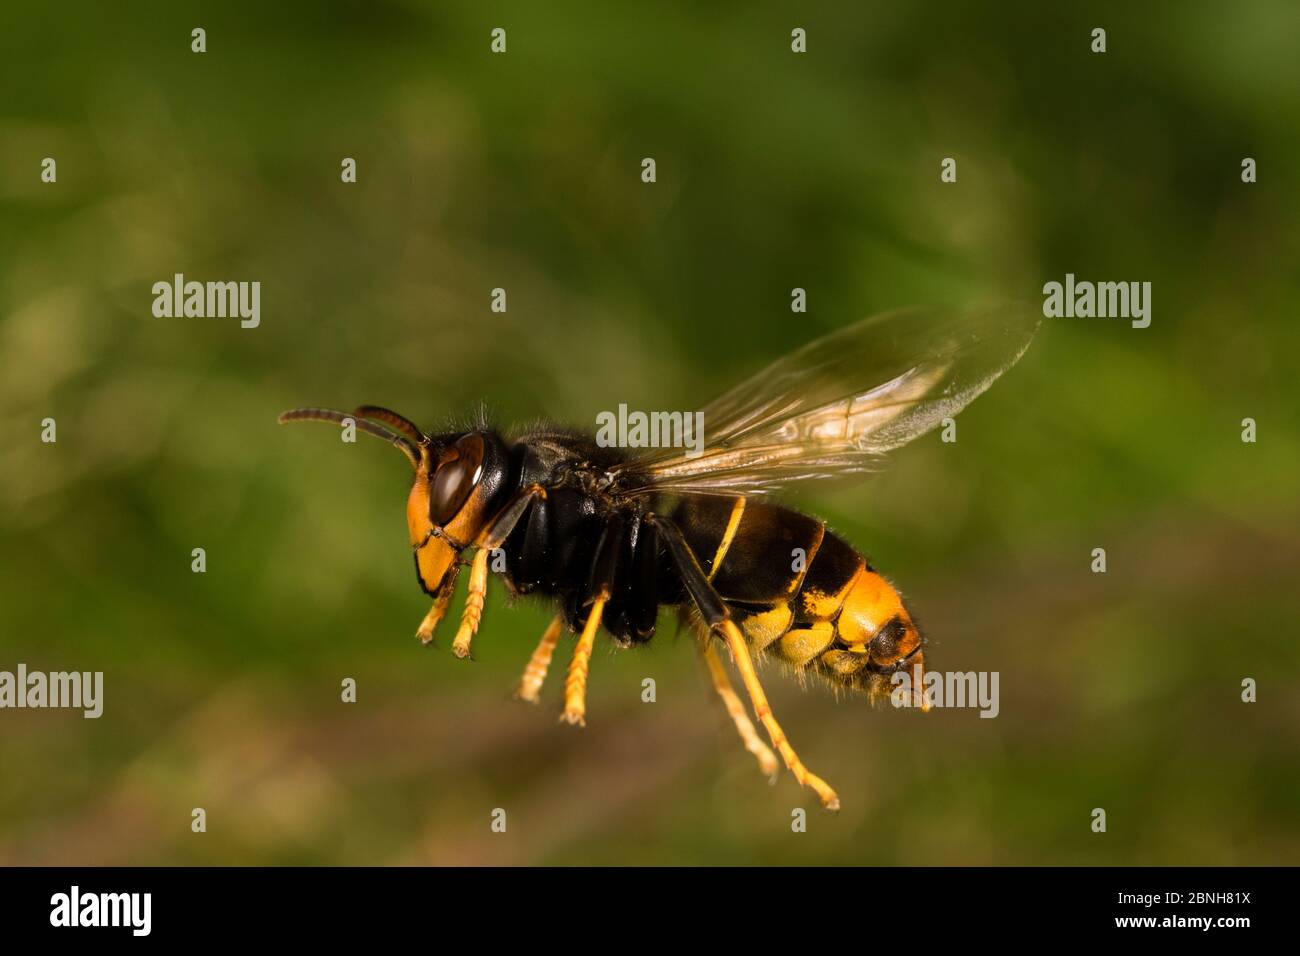 Asian predatory wasp (Vespa velutina nigrithorax) people destroying and removing the nest, invasive species, Nantes, France, September 2015 Stock Photo